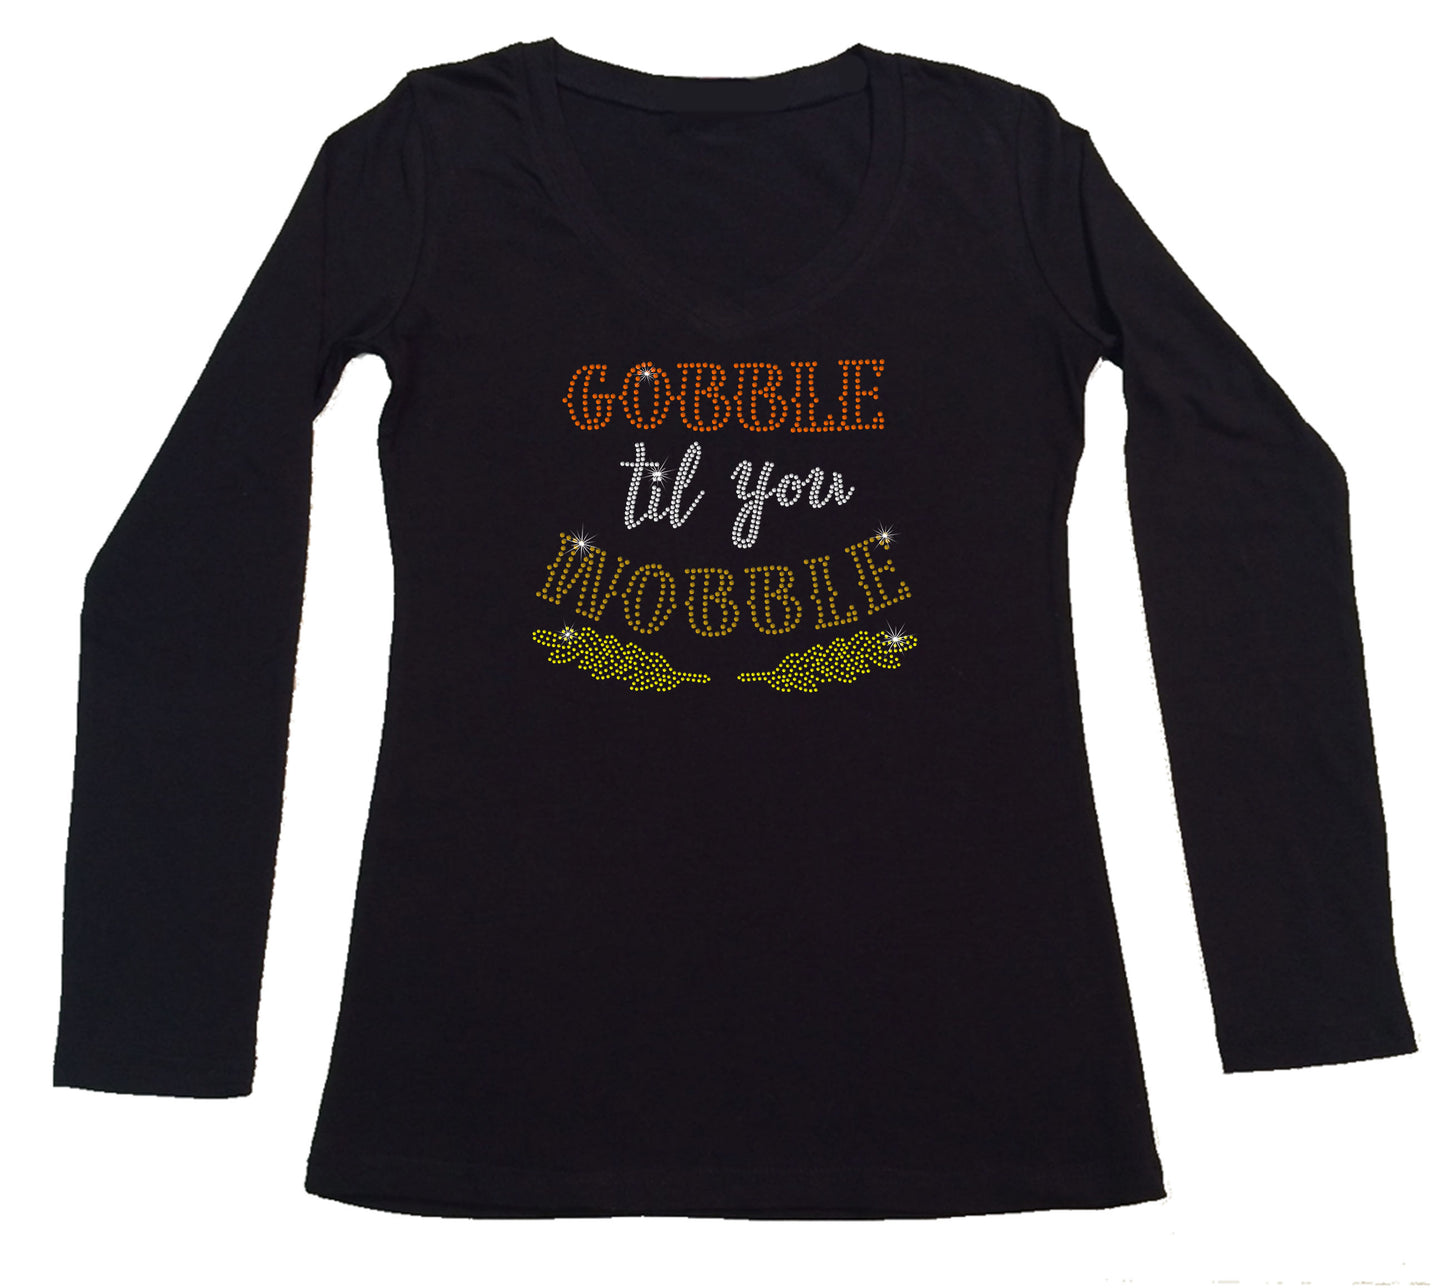 Womens T-shirt with Gobble til you Wobble in Rhinestones